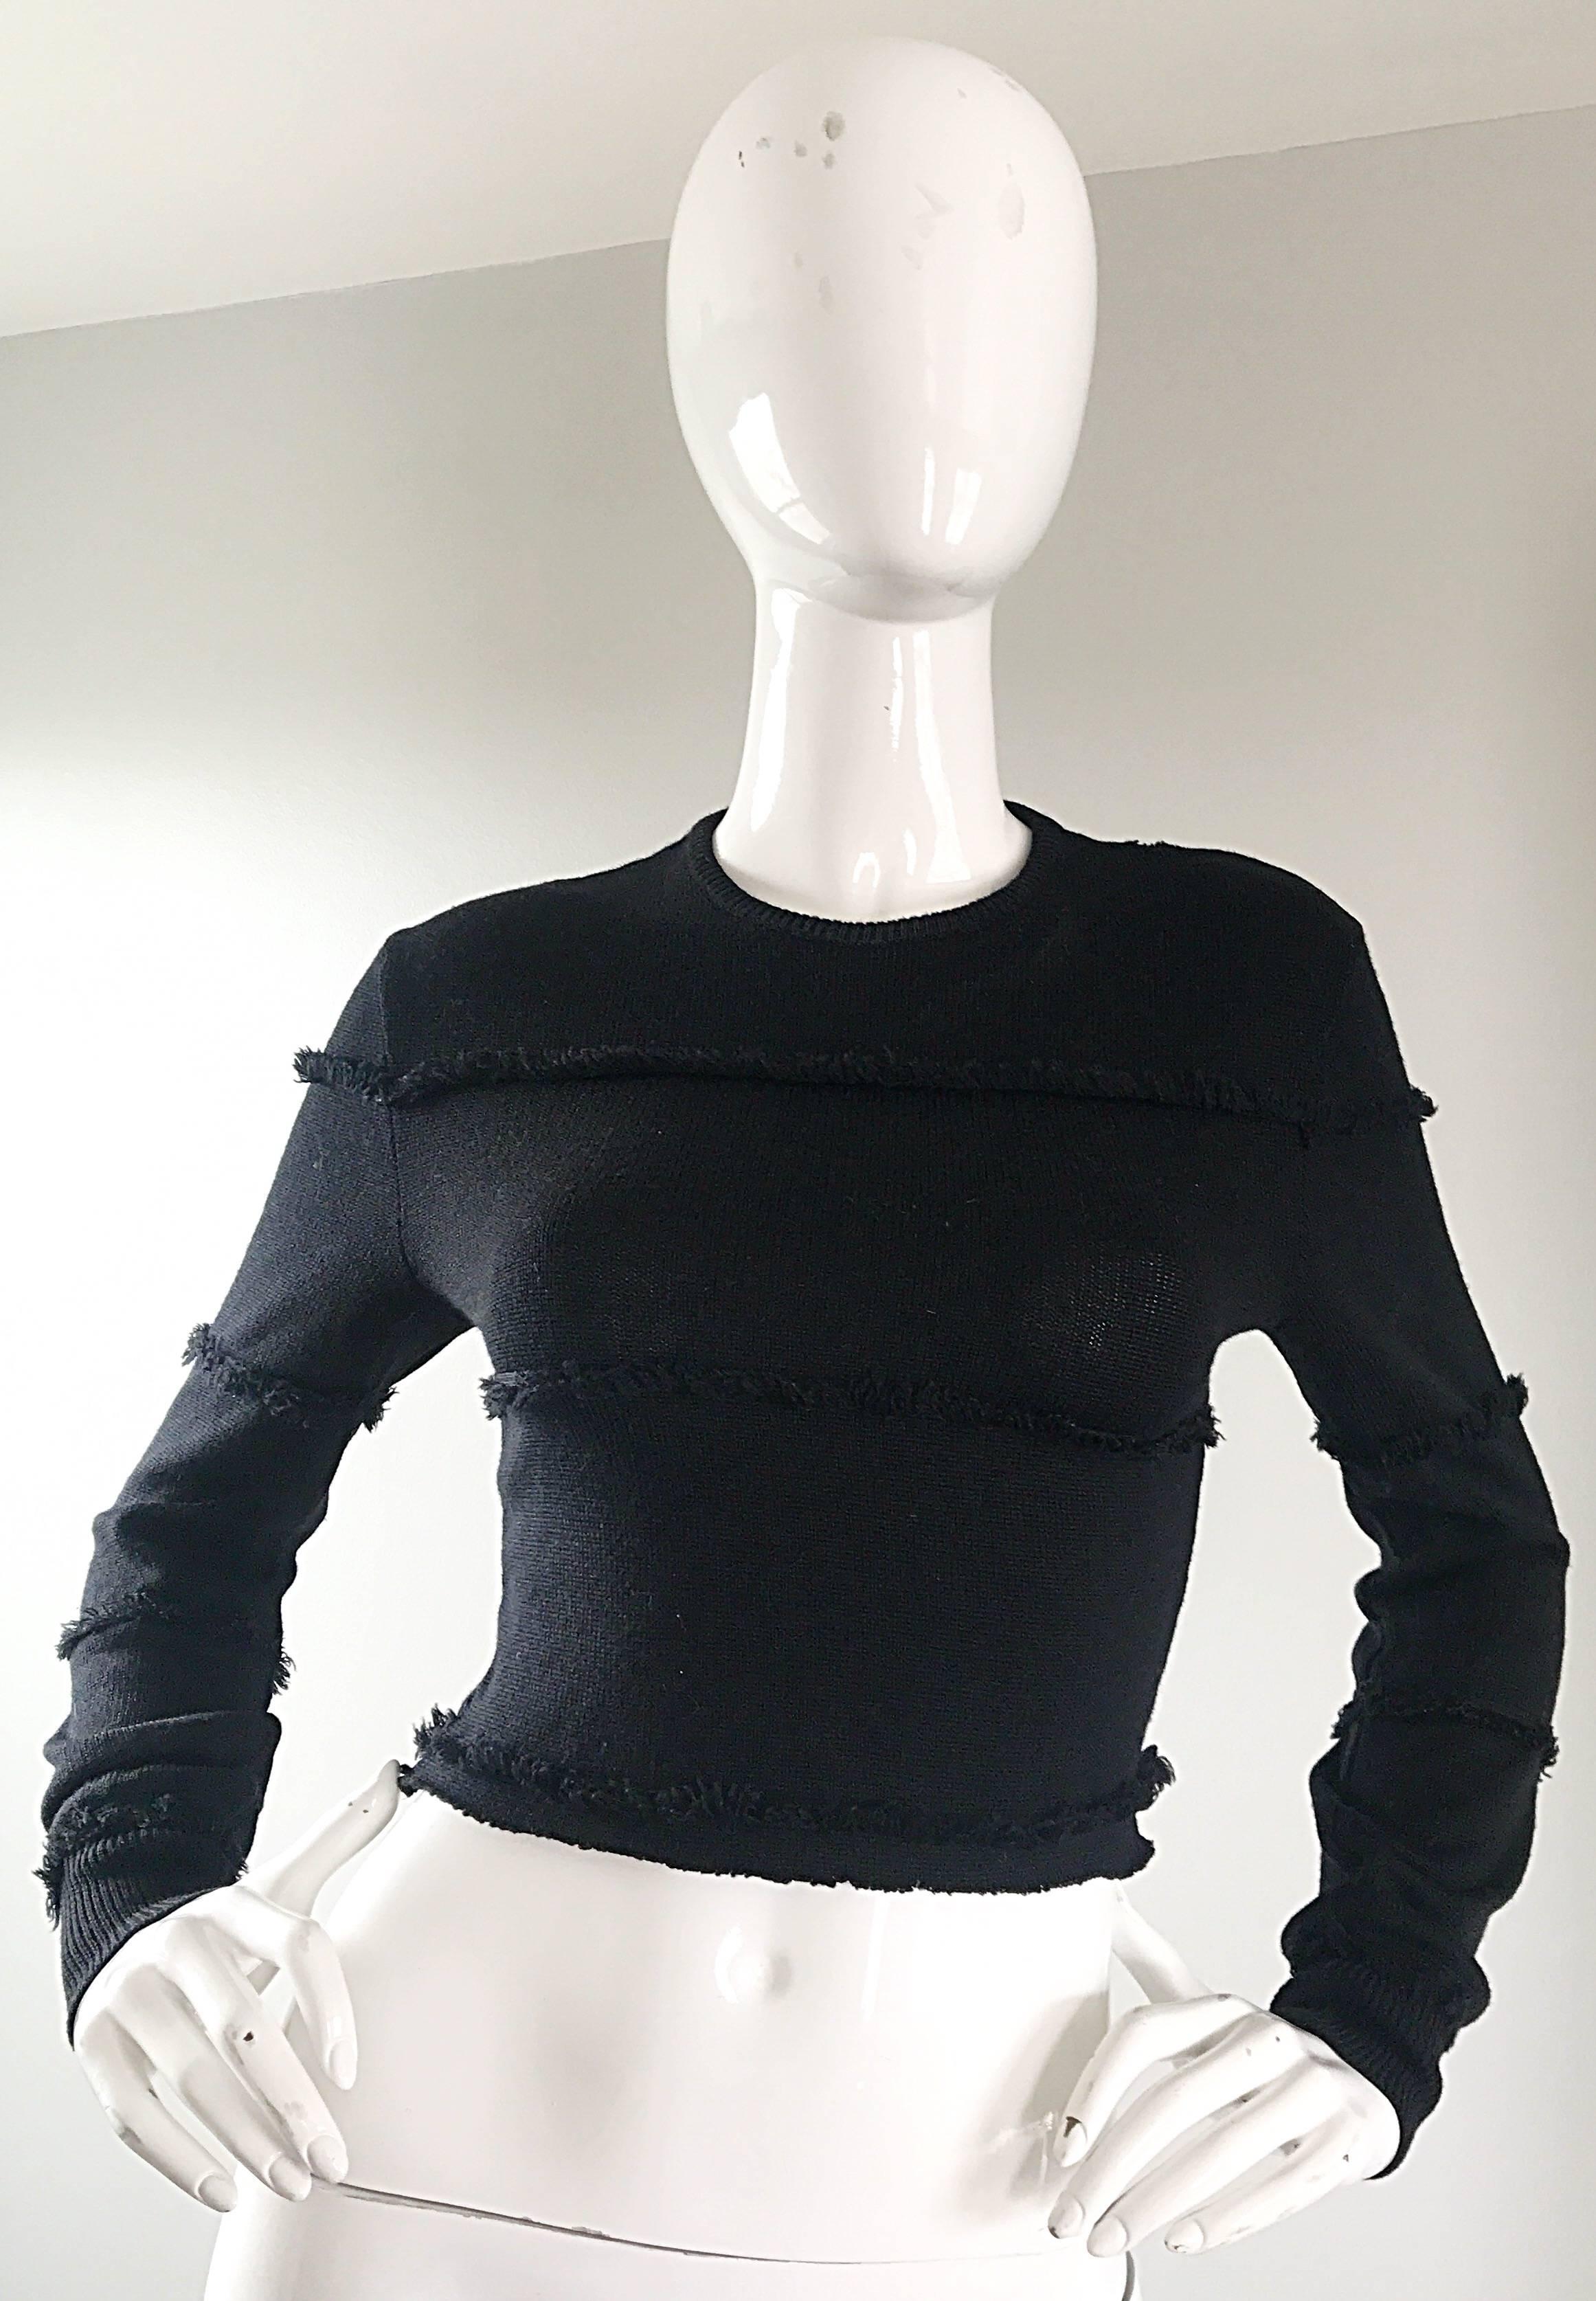 Rare early GIANNI VERSACE black cotton knit fringed cropped sweater top! Features lines of fringe throughout the entire garment. Sexy crop fit reveals just the right amount of skin. A truly versatile wardrobe staple. The pictures 90s MOSCHINO low